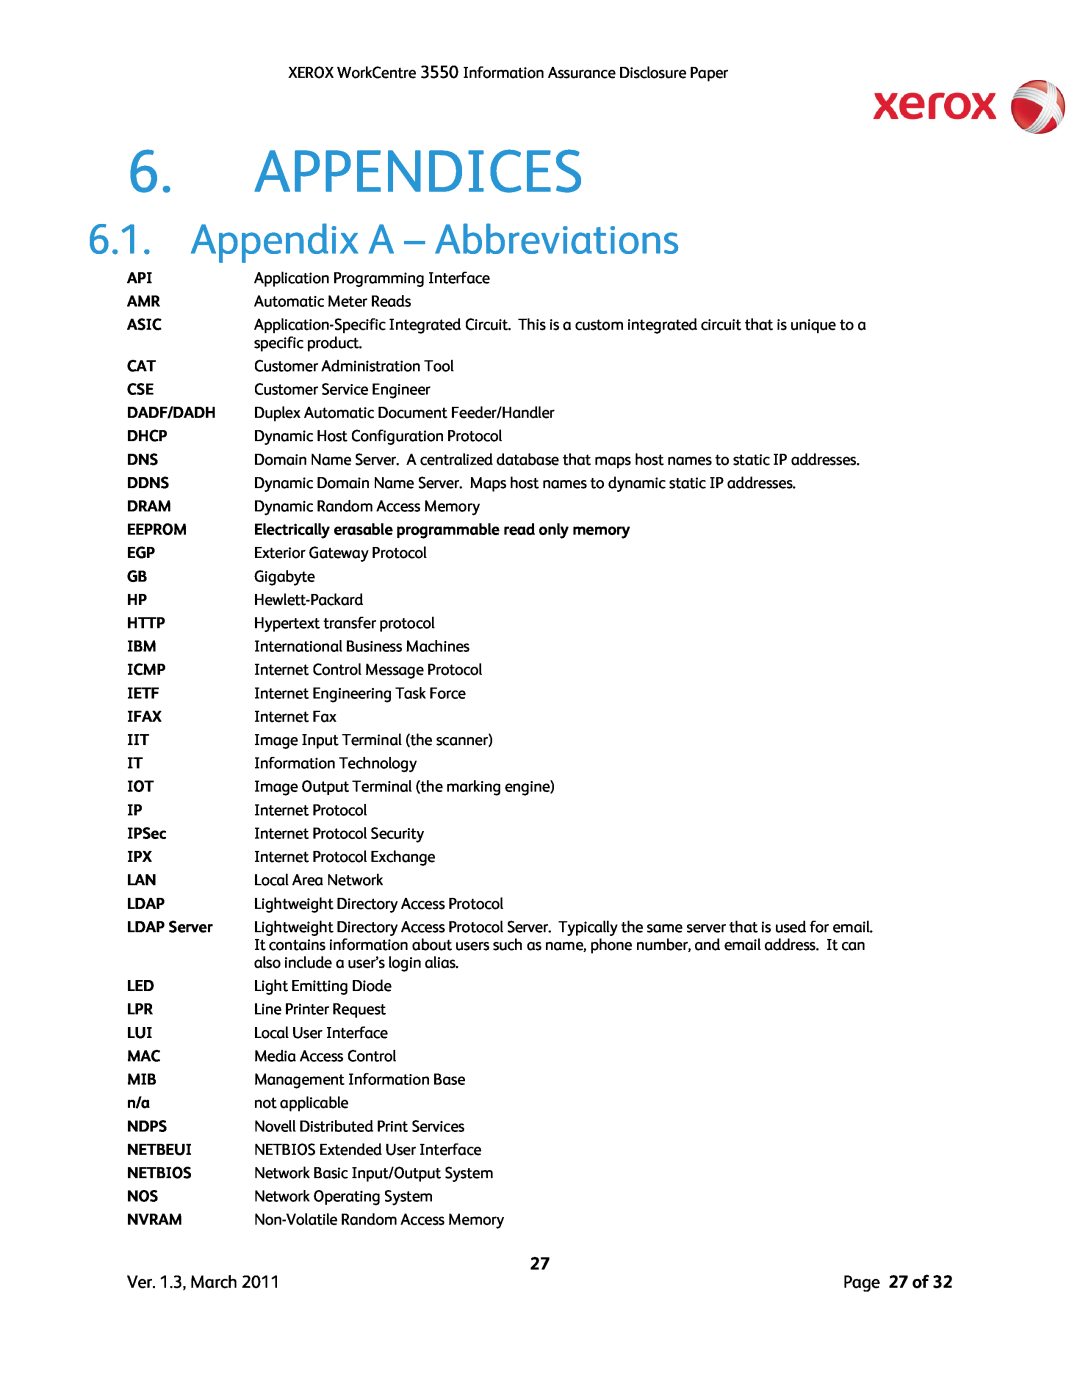 Xerox 3550 Appendices, Appendix A - Abbreviations, Asic, Dadf/Dadh, Dhcp, Ddns, Dram, Http, Icmp, Ietf, Ifax, IPSec, Ldap 